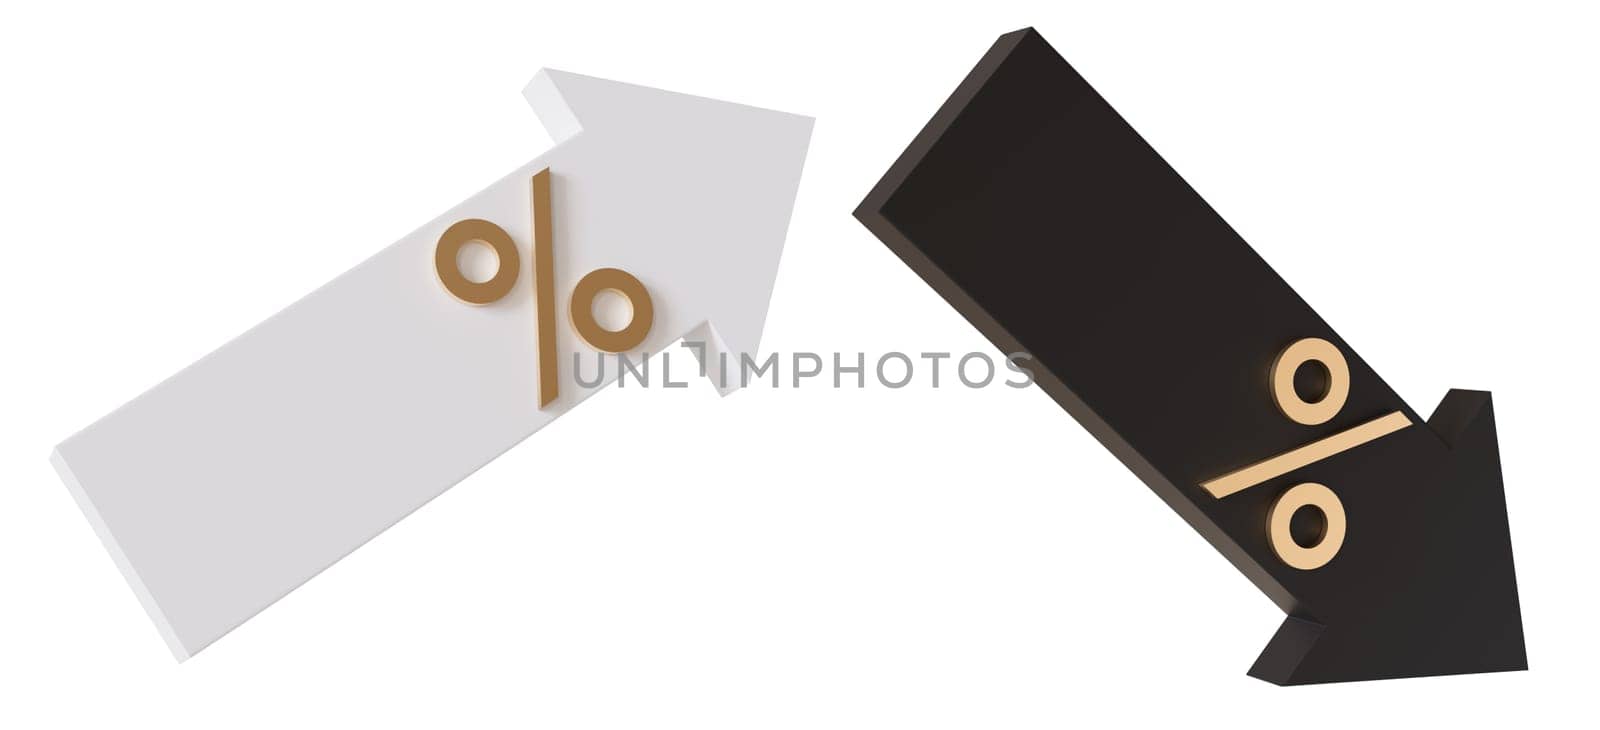 Arrows with percentage symbols in white and black, symbolizing economic trends, perfect for financial, sales, and promotional materials. Arrow with percent sign, isolated on white background. 3D